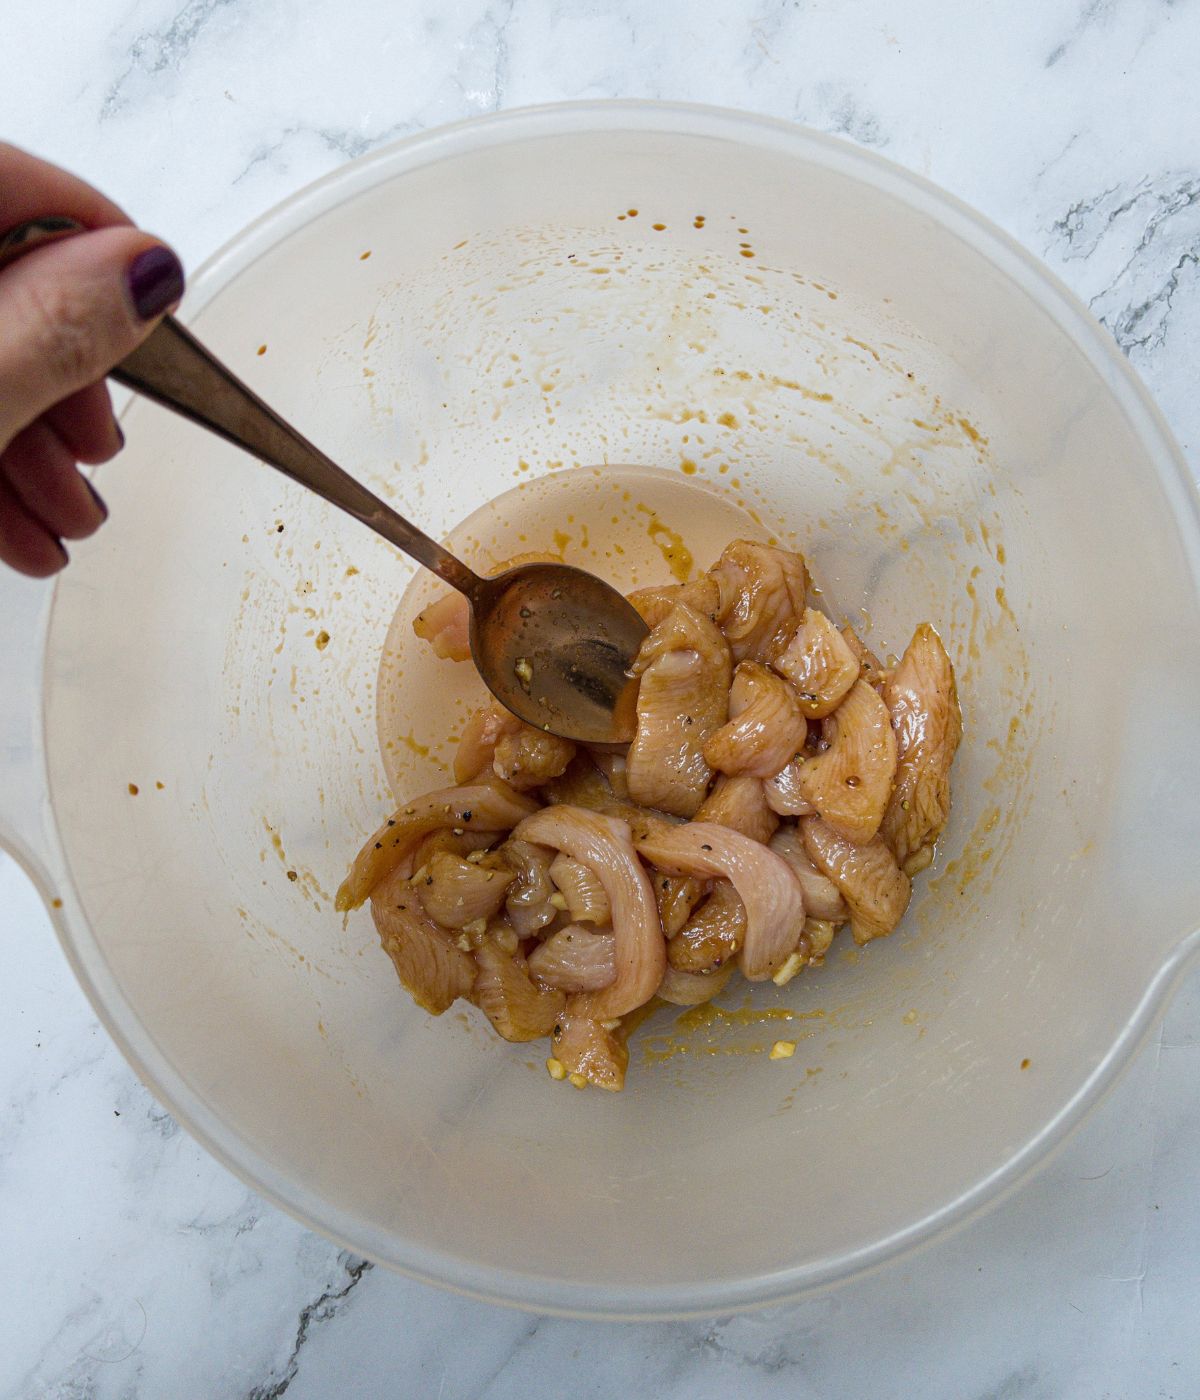 Chicken pieces marinated in soy sauce and ginger, being mixed in a bowl.